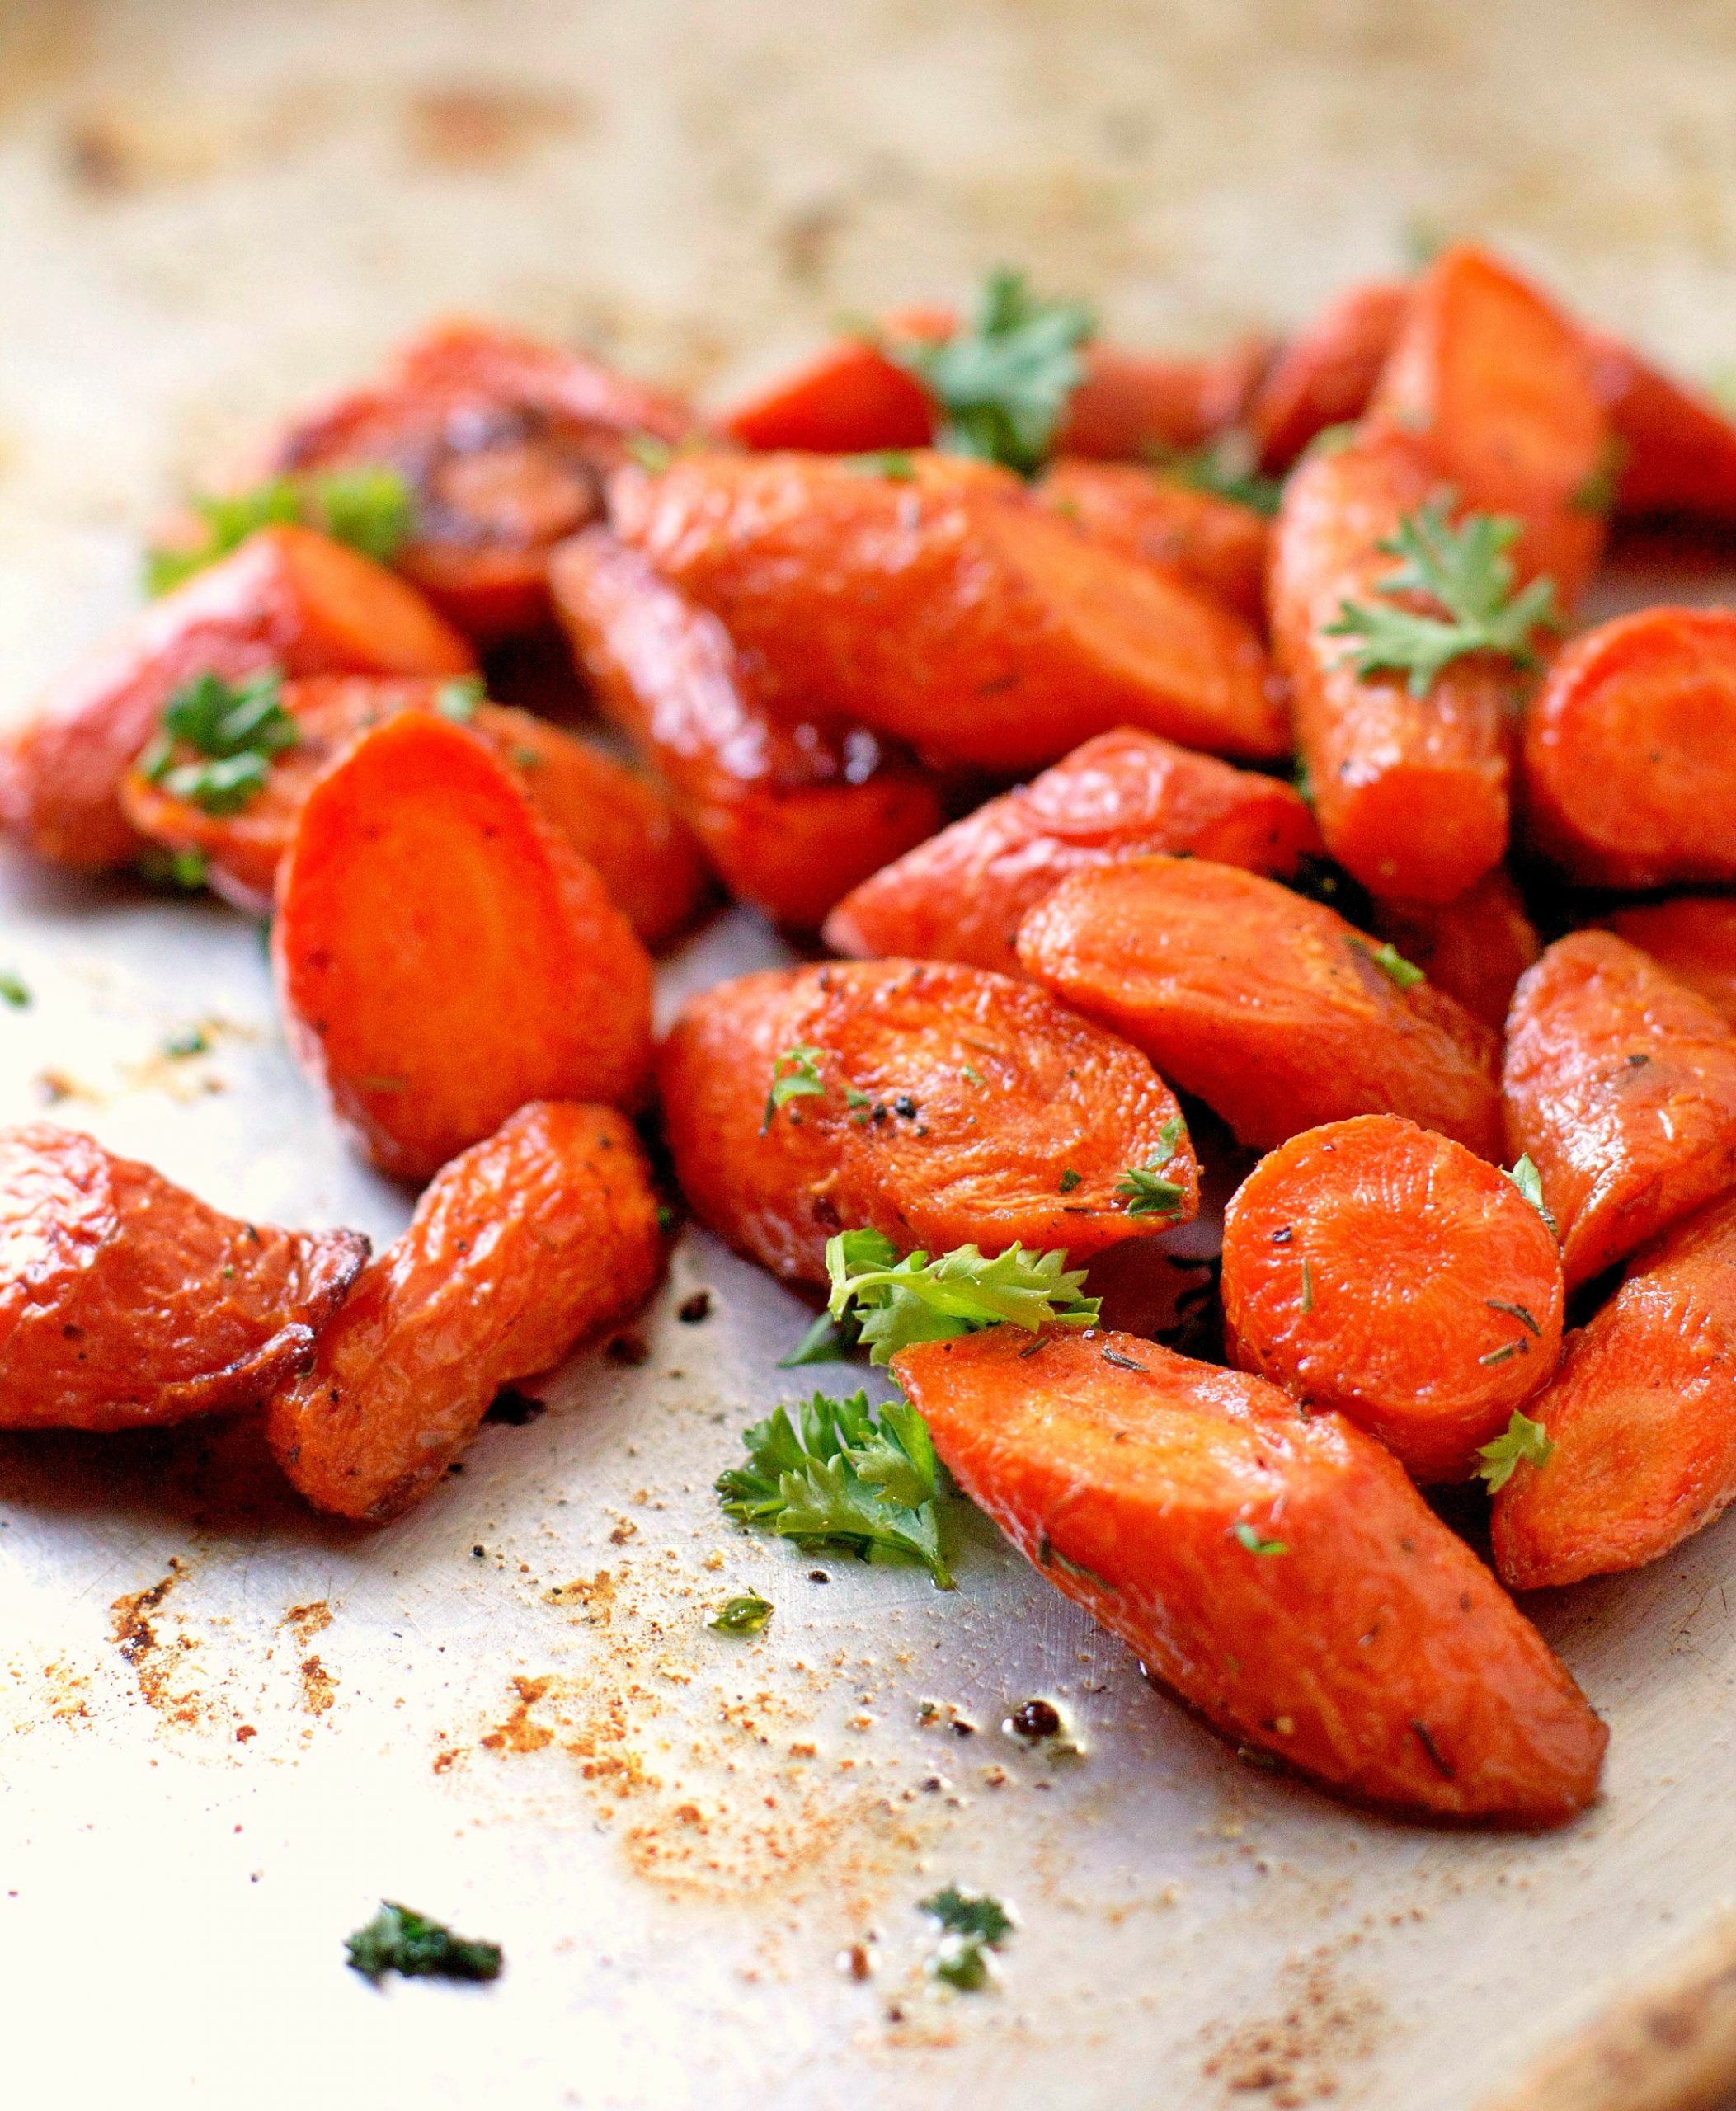 An oven sheet with roasted carrots, topped with spices and parsley